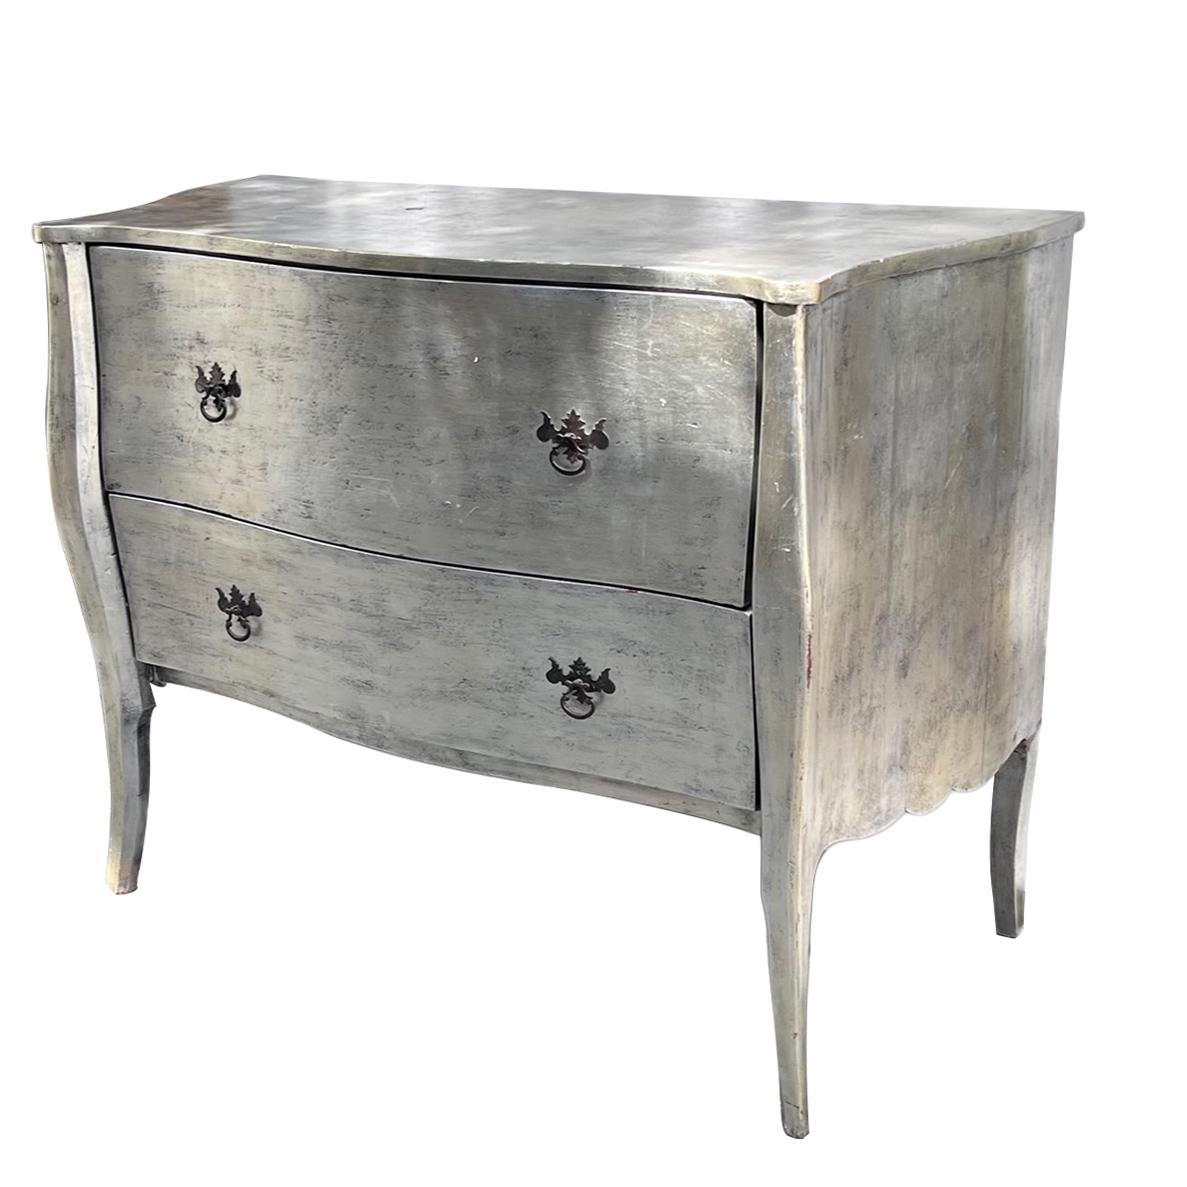 A circa 1920s Venetian chest of drawers with silver leaf finish.

Measurements:
Height: 35.5